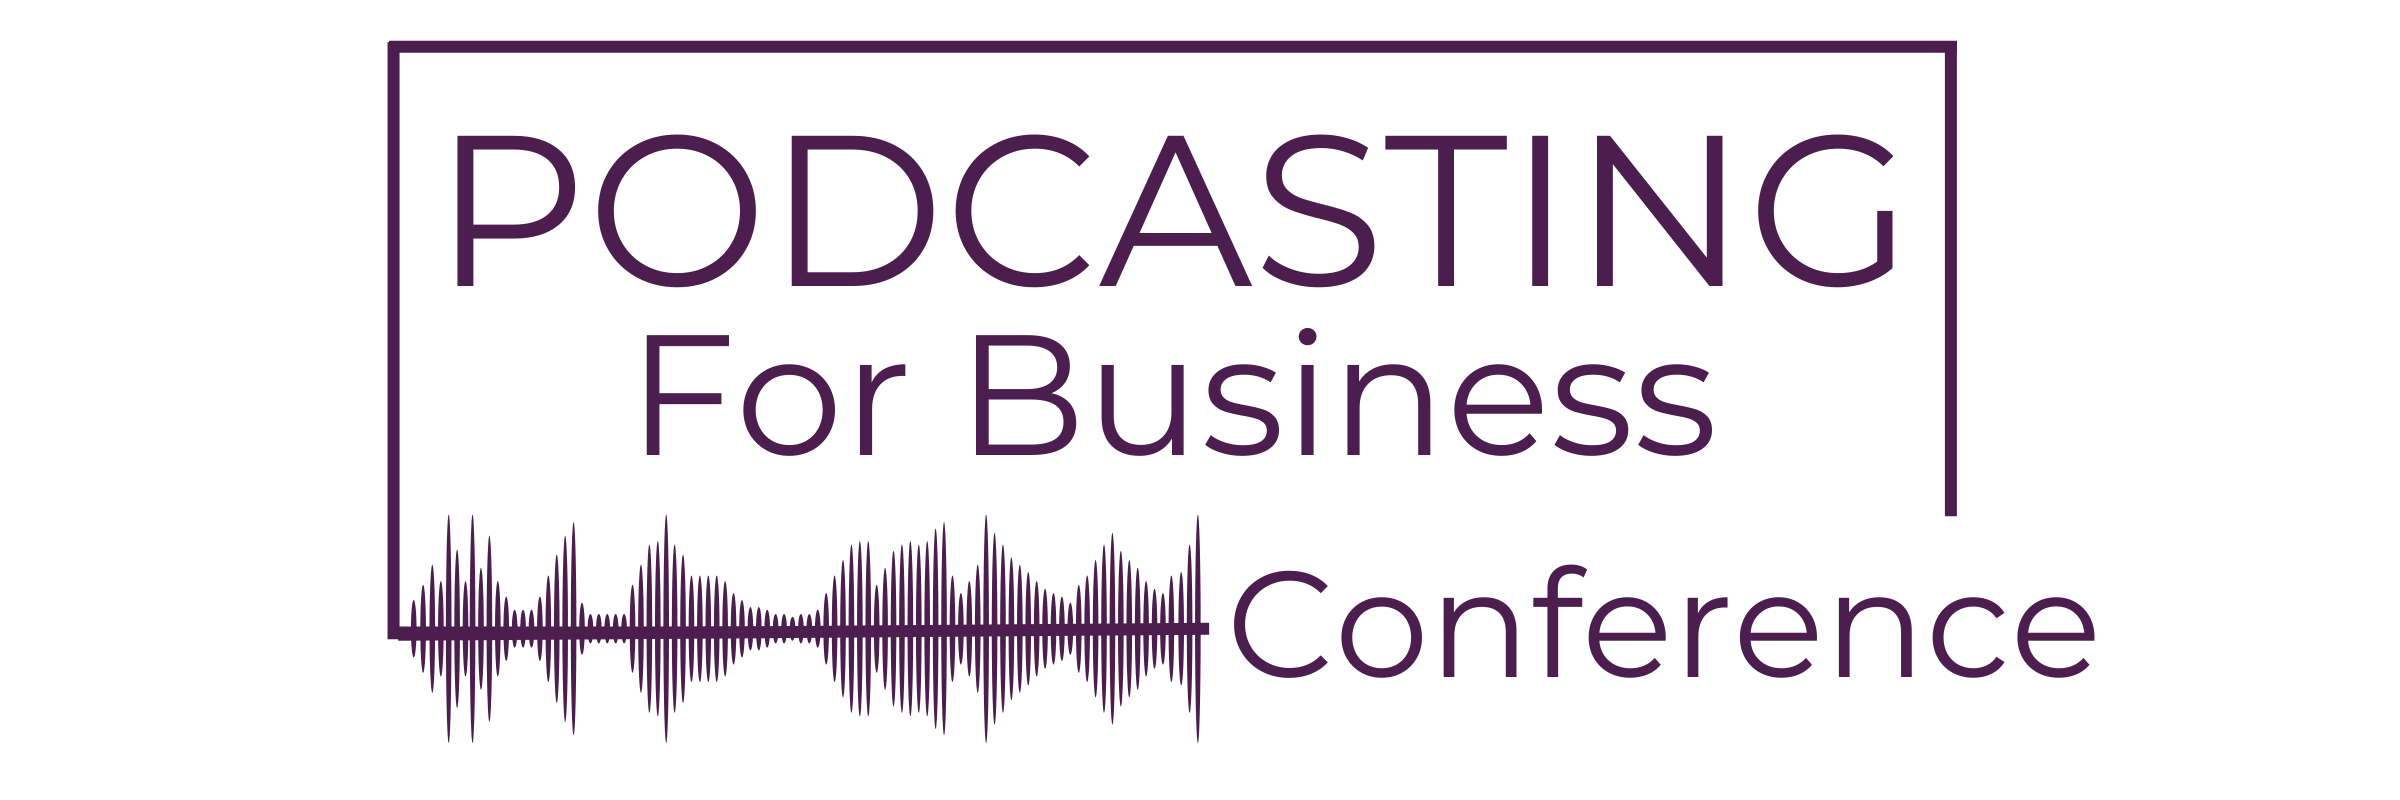 Podcasting For Business Conference